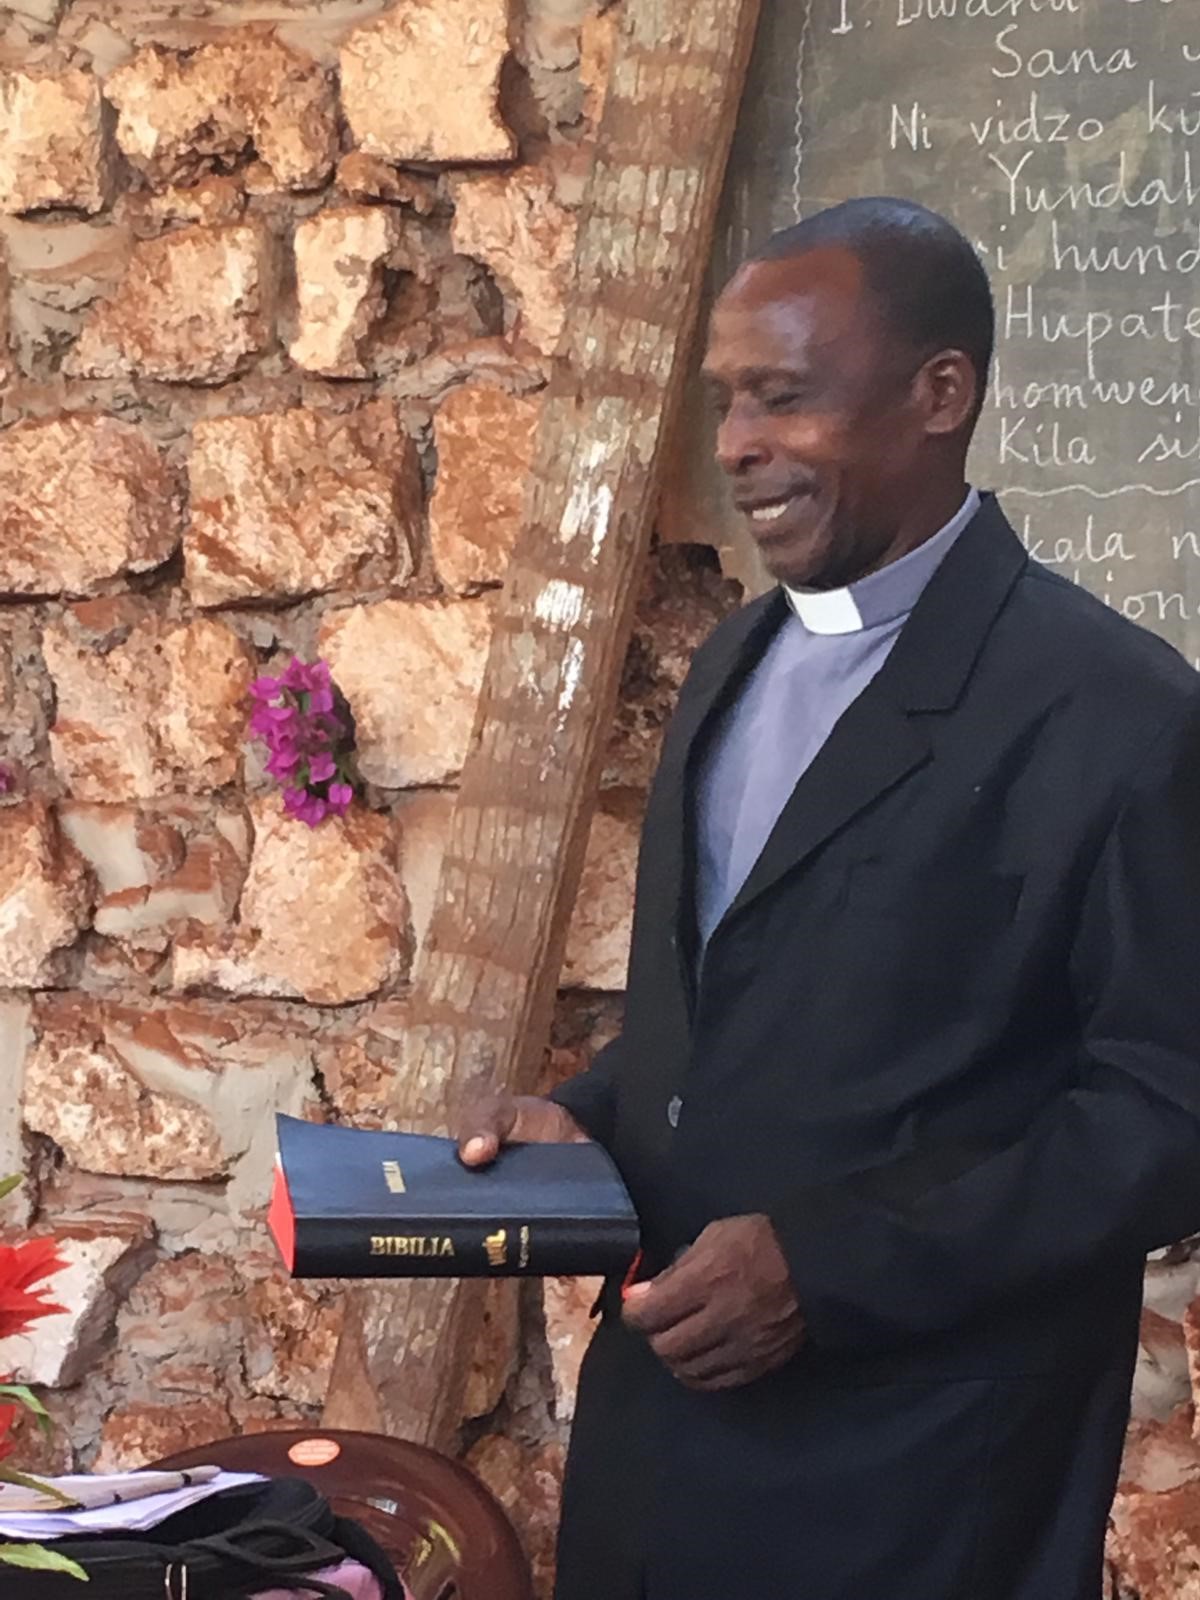 Leader with new Bible translation